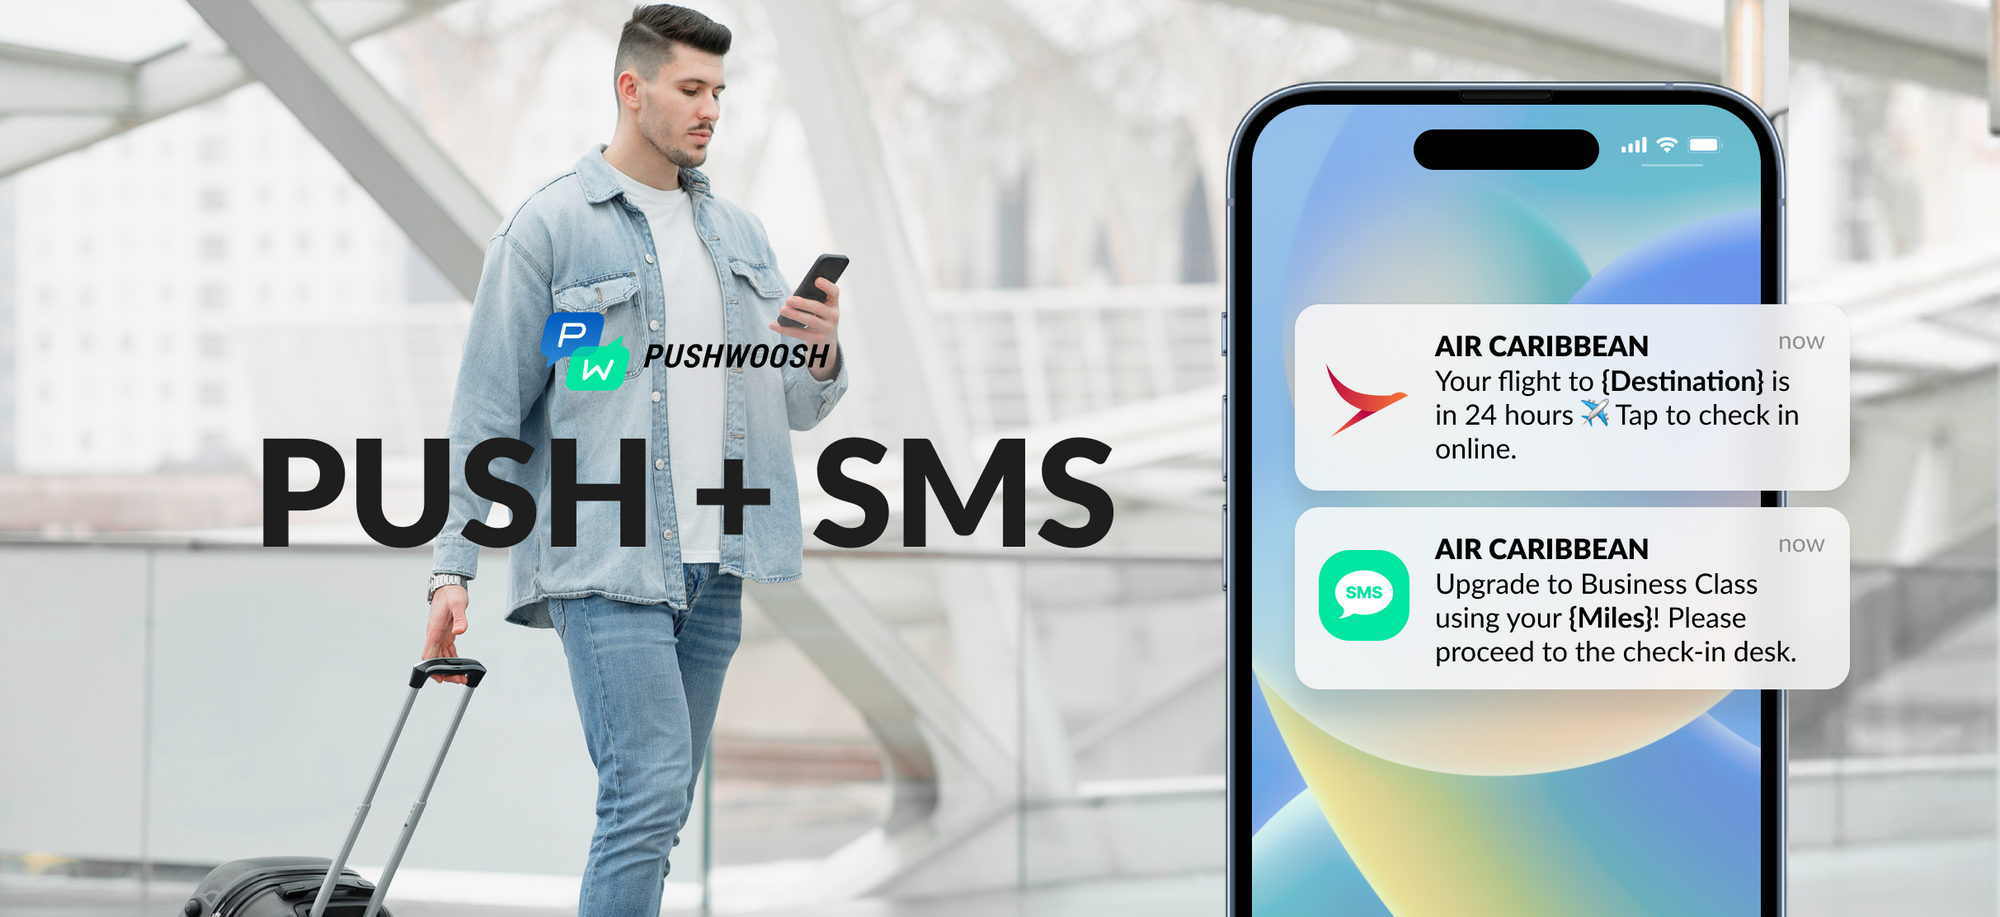 How to Use SMS and Push Notifications to Build a High-Potential Omnichannel Presence